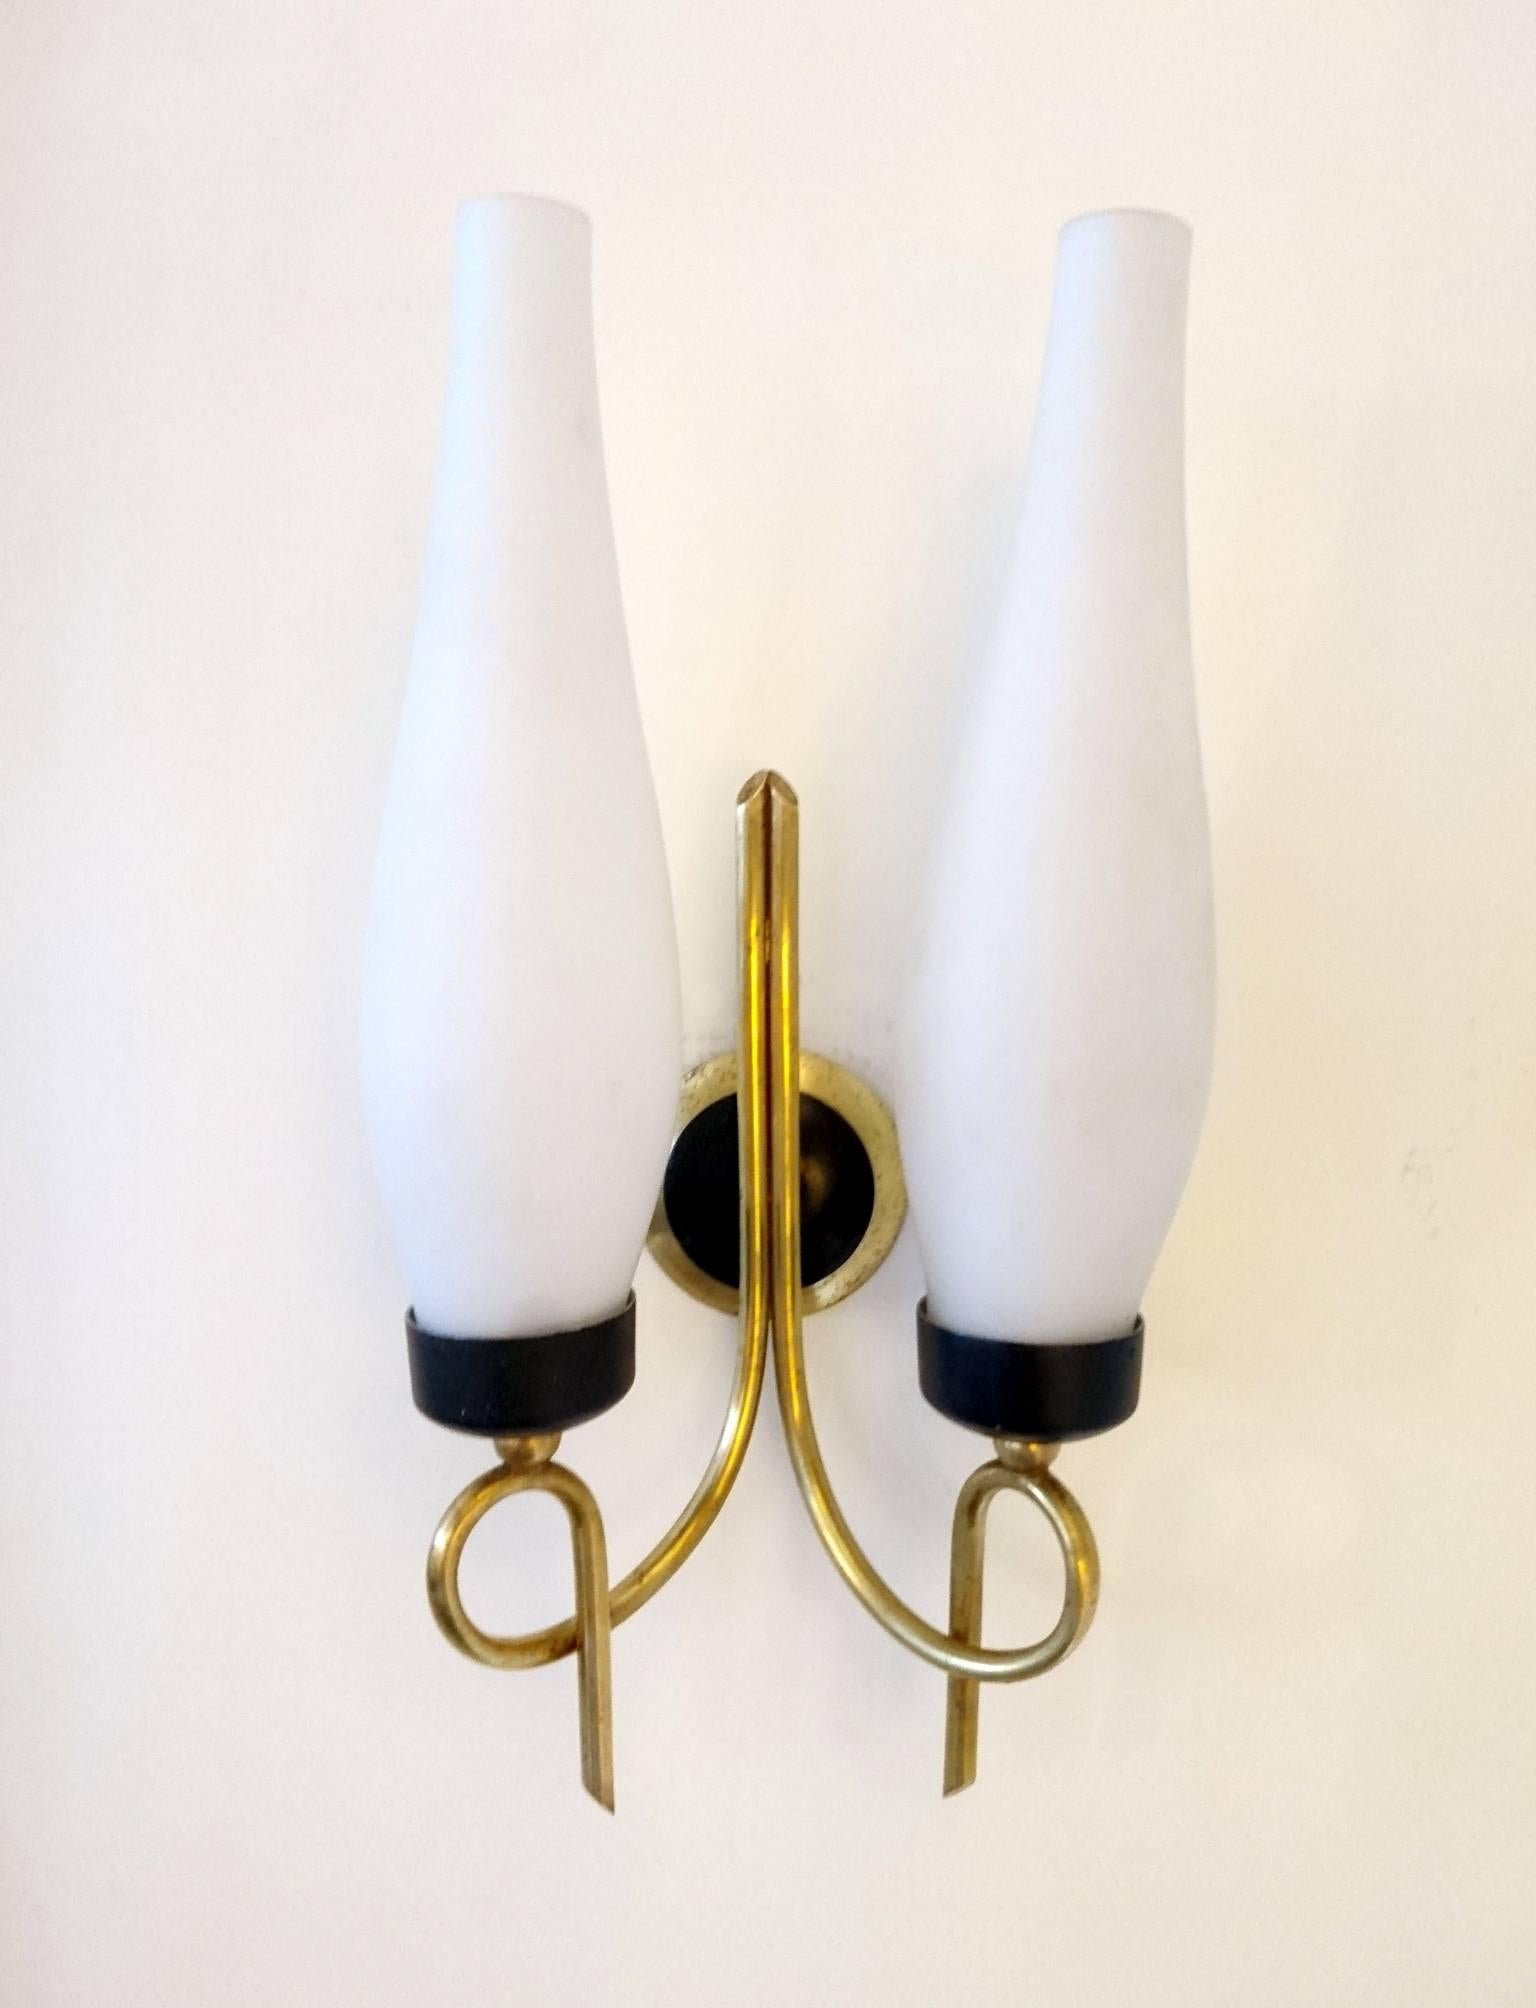 Two sconces with double lights in brass and black metal with white opaque glass shades.